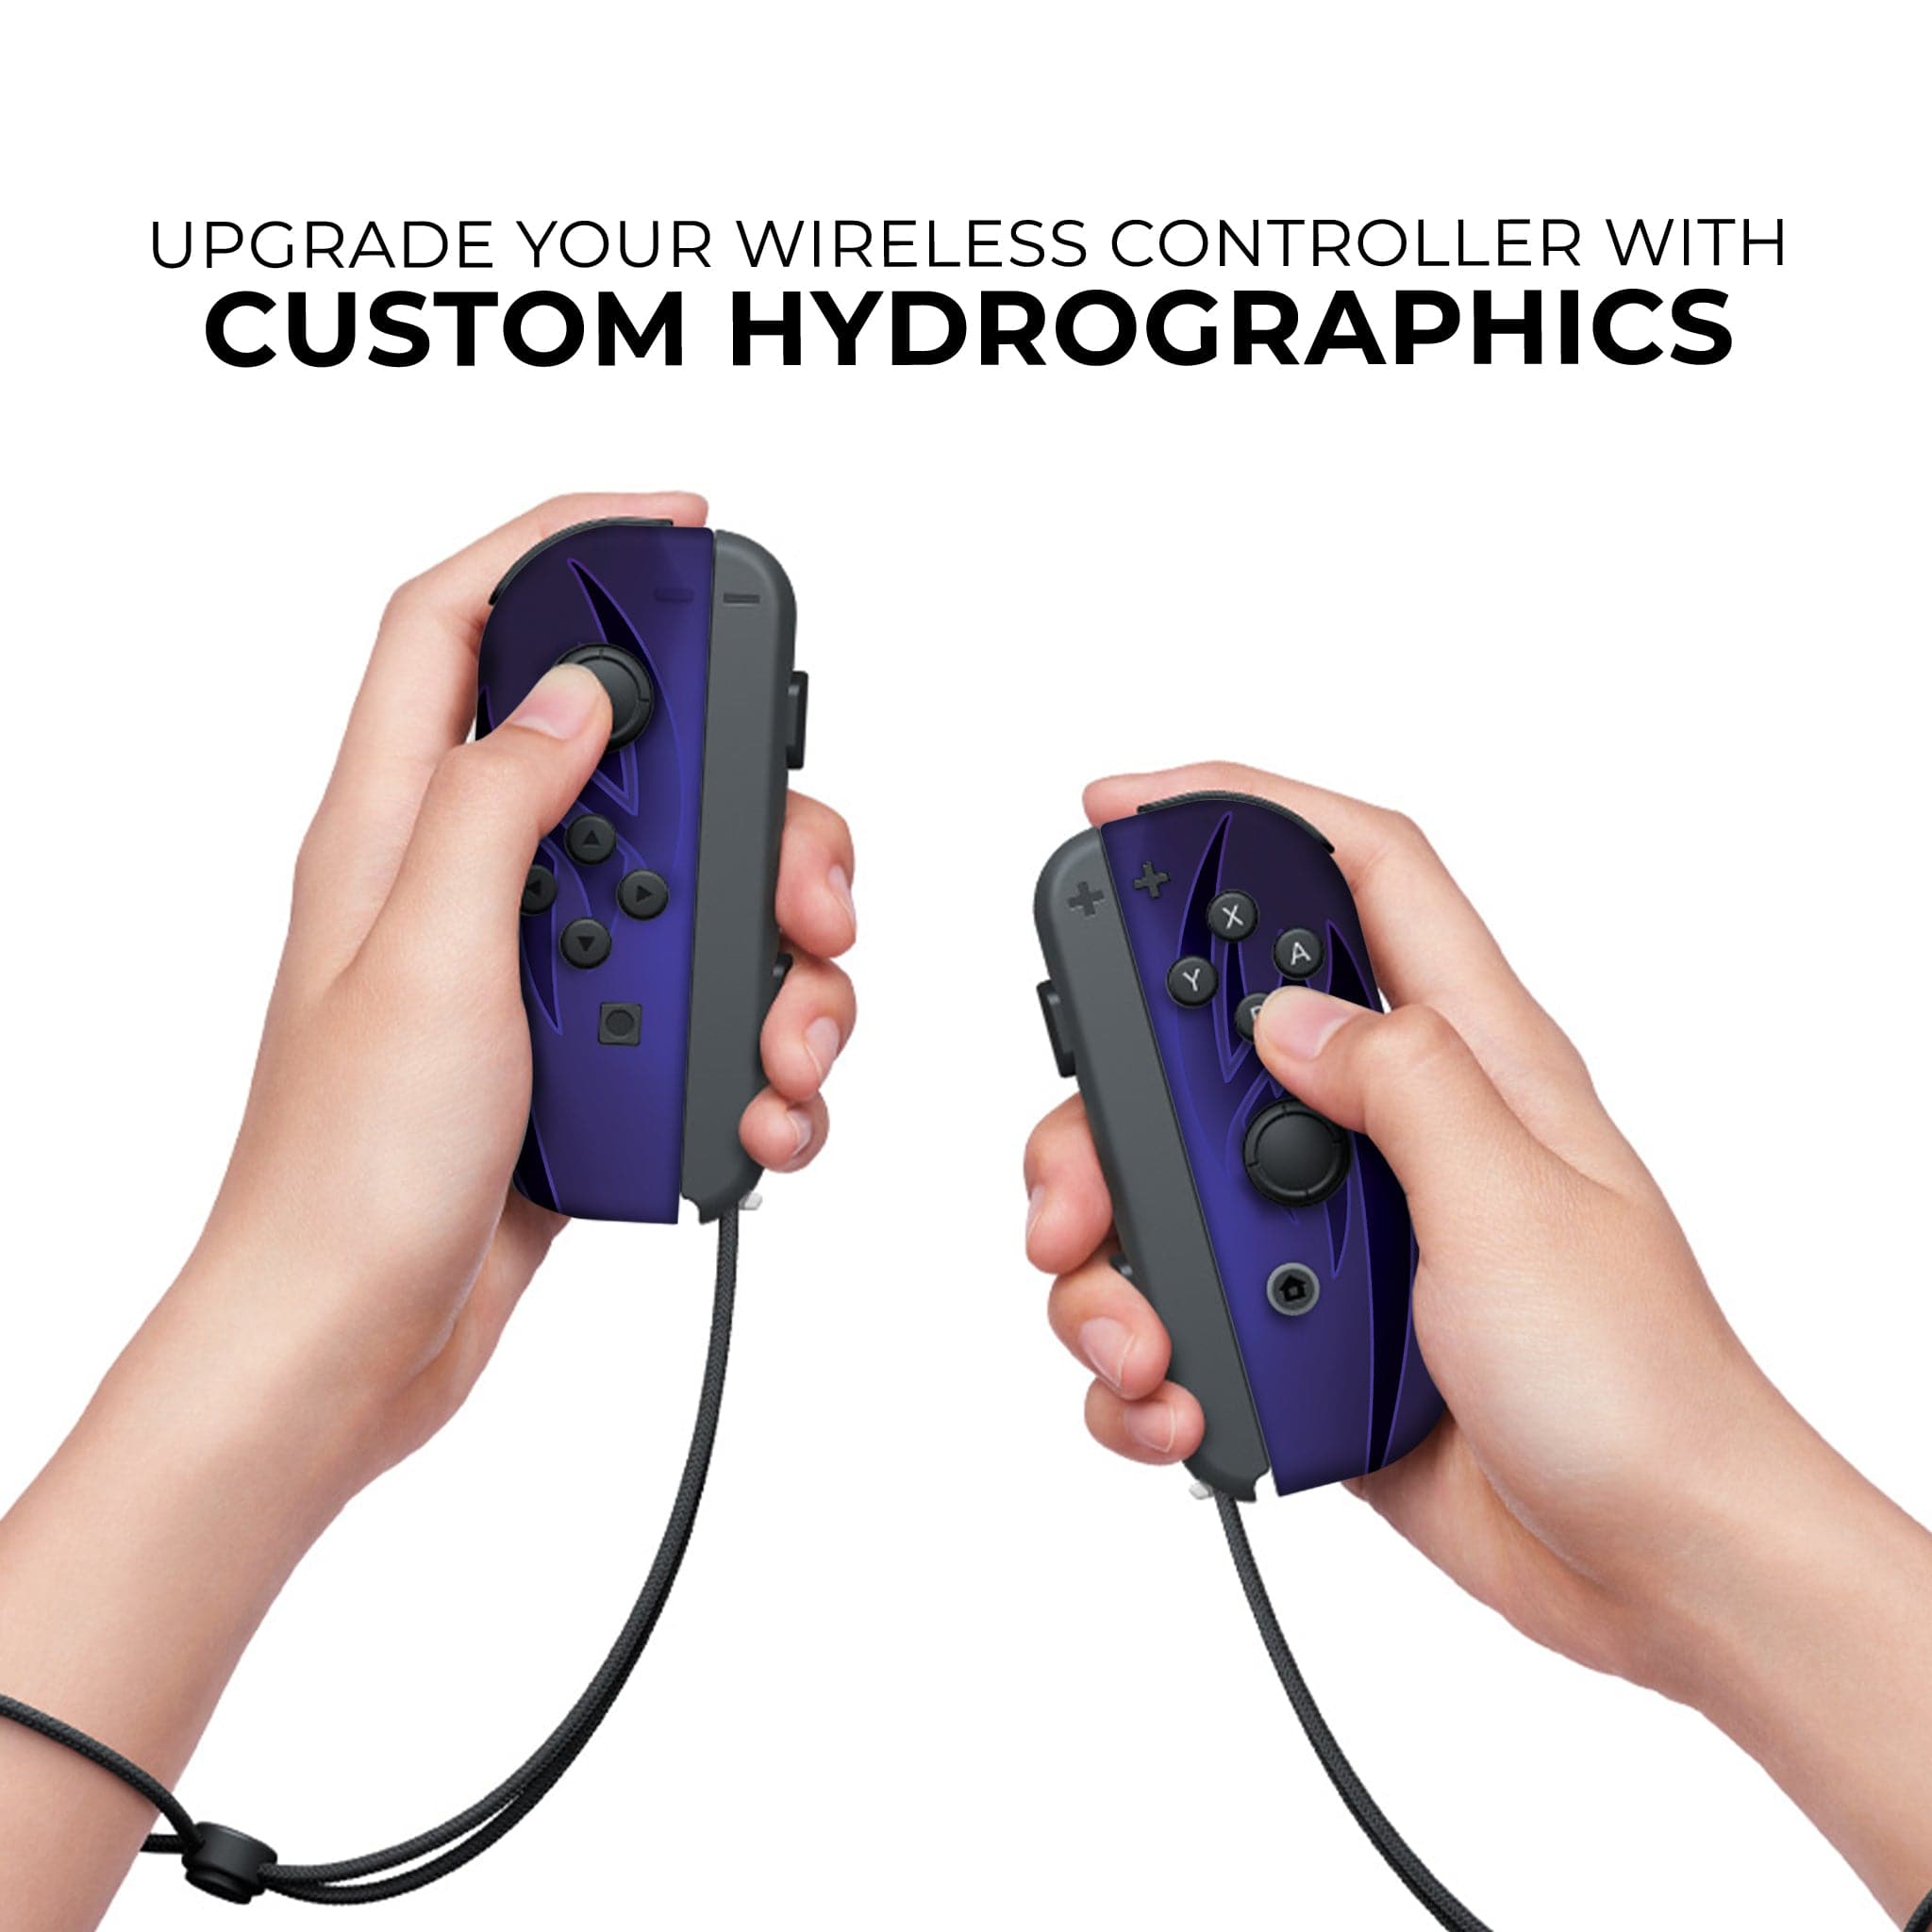 Kazuya Inspired Nintendo Switch Joy-Con Left and Right Switch Controllers by Nintendo